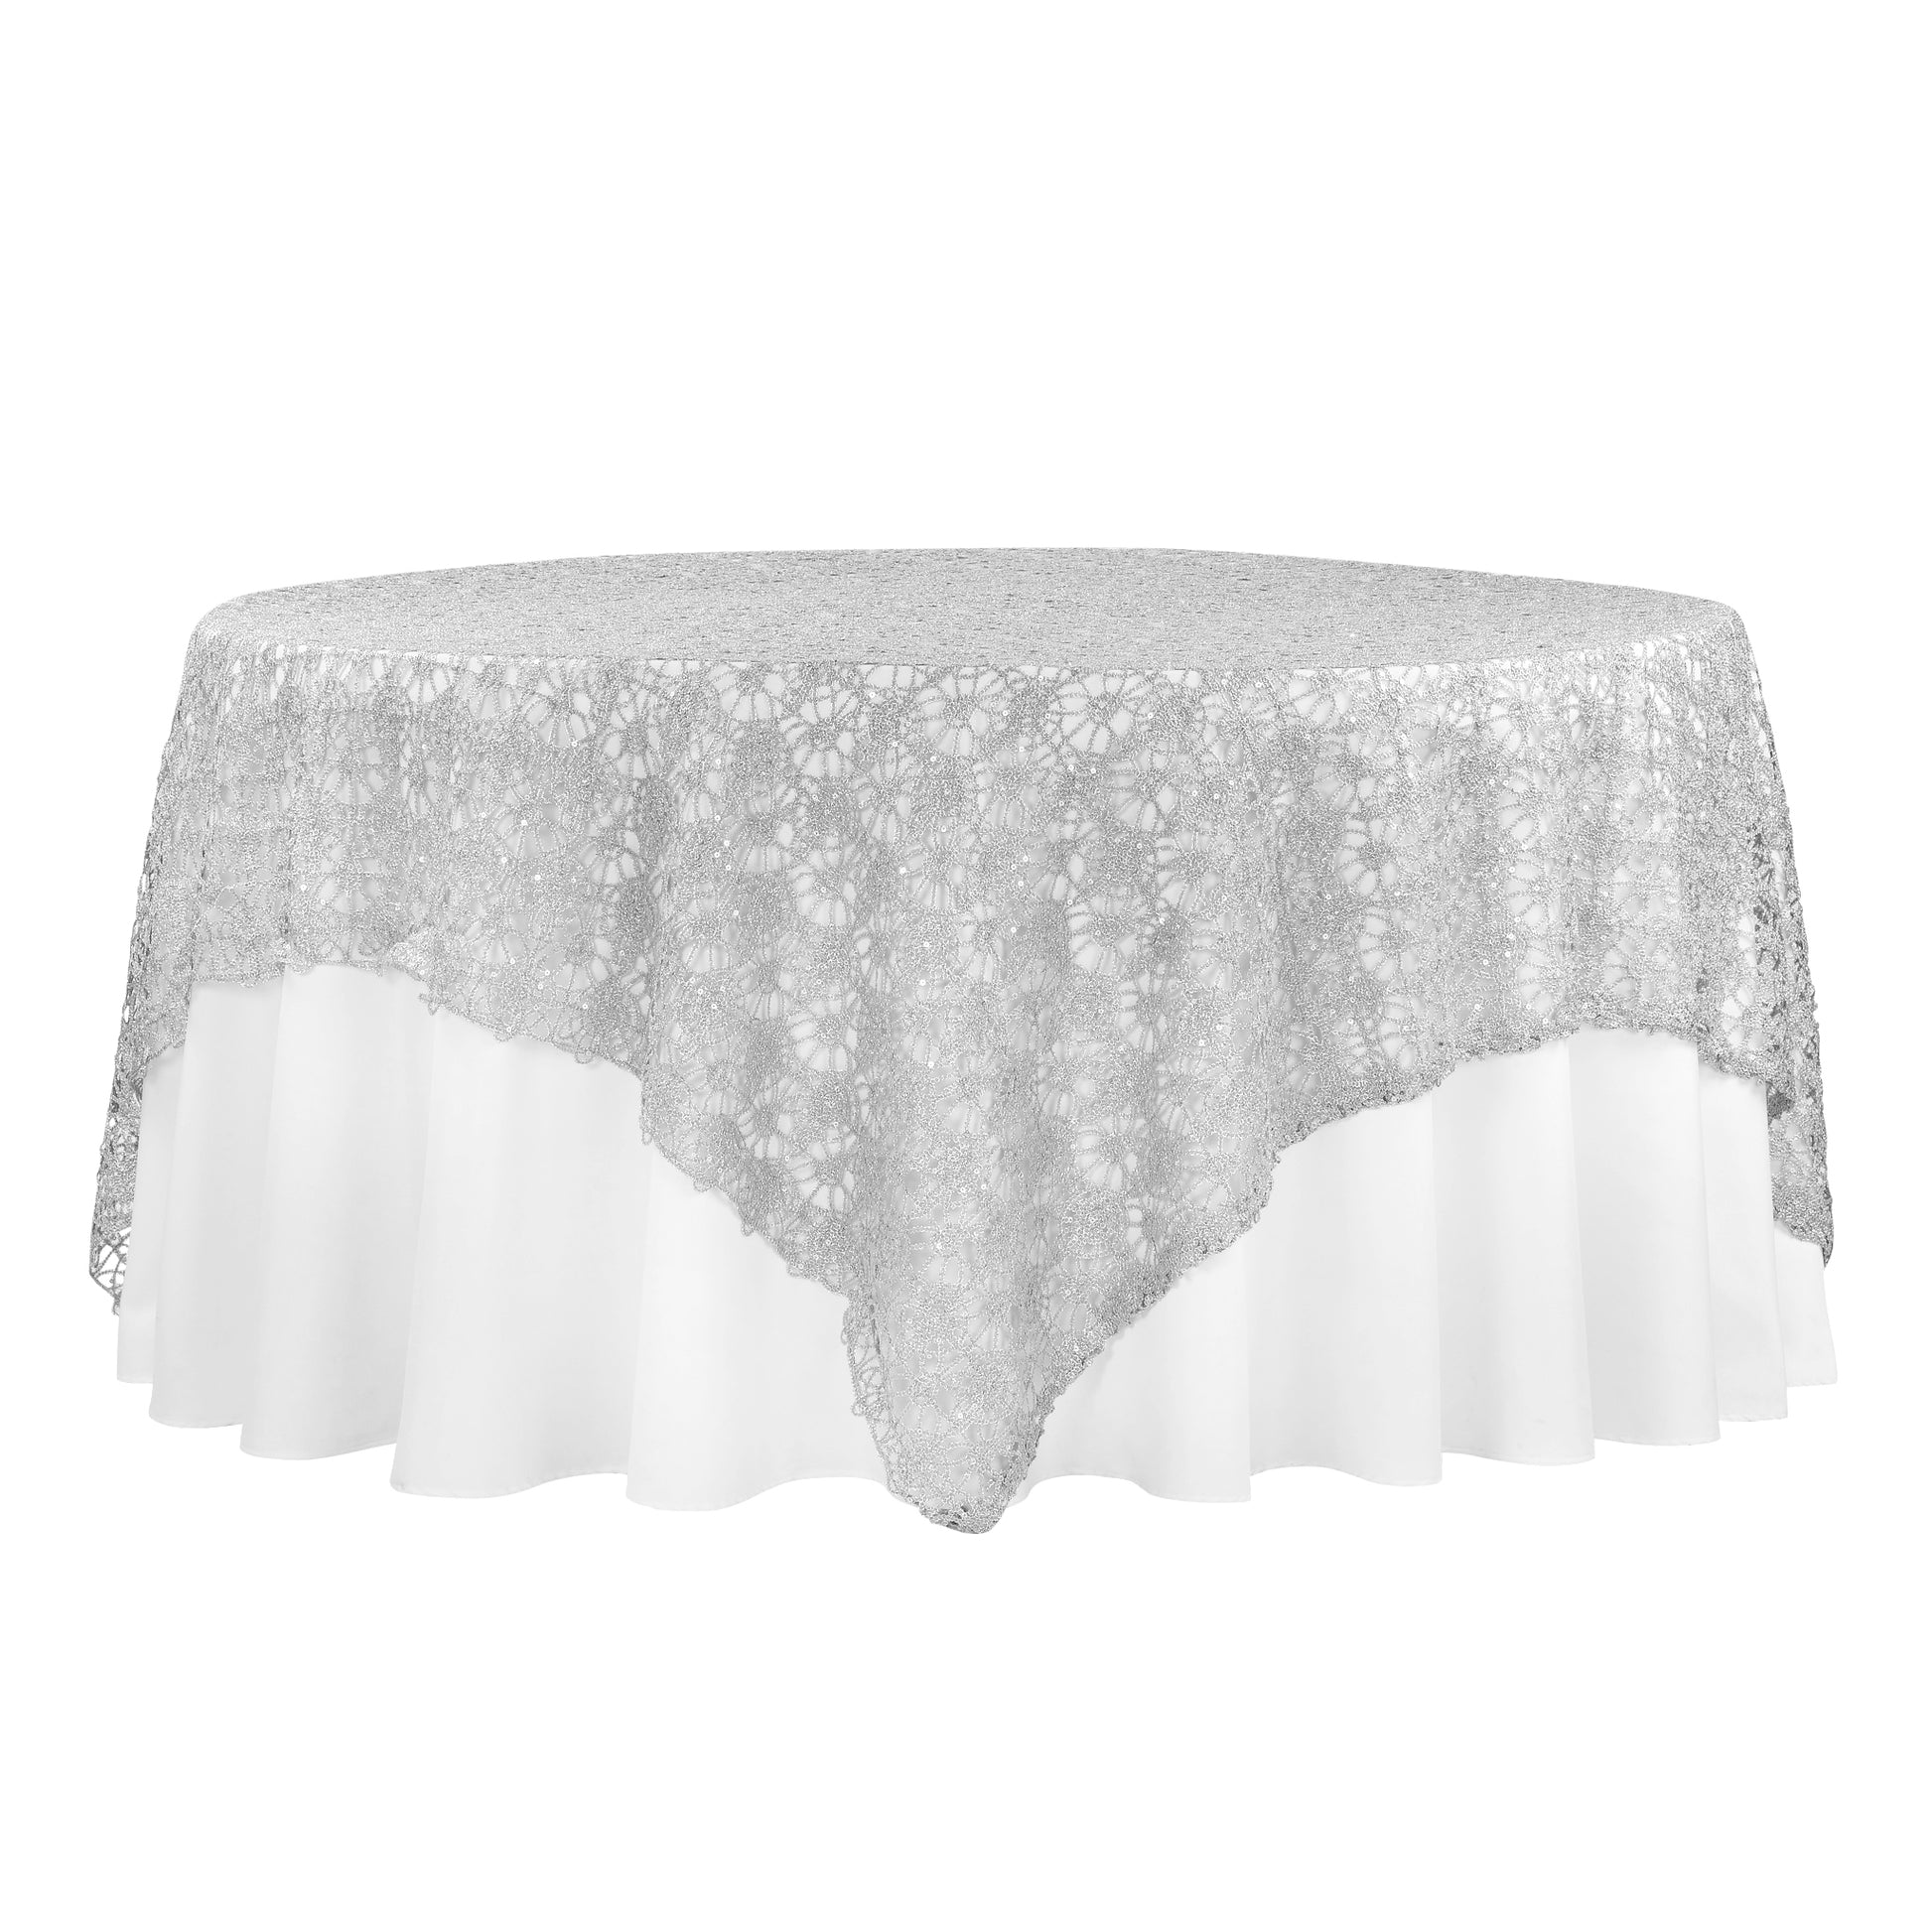 Chemical Lace 90"x90" Square Table Overlay - Silver - CV Linens